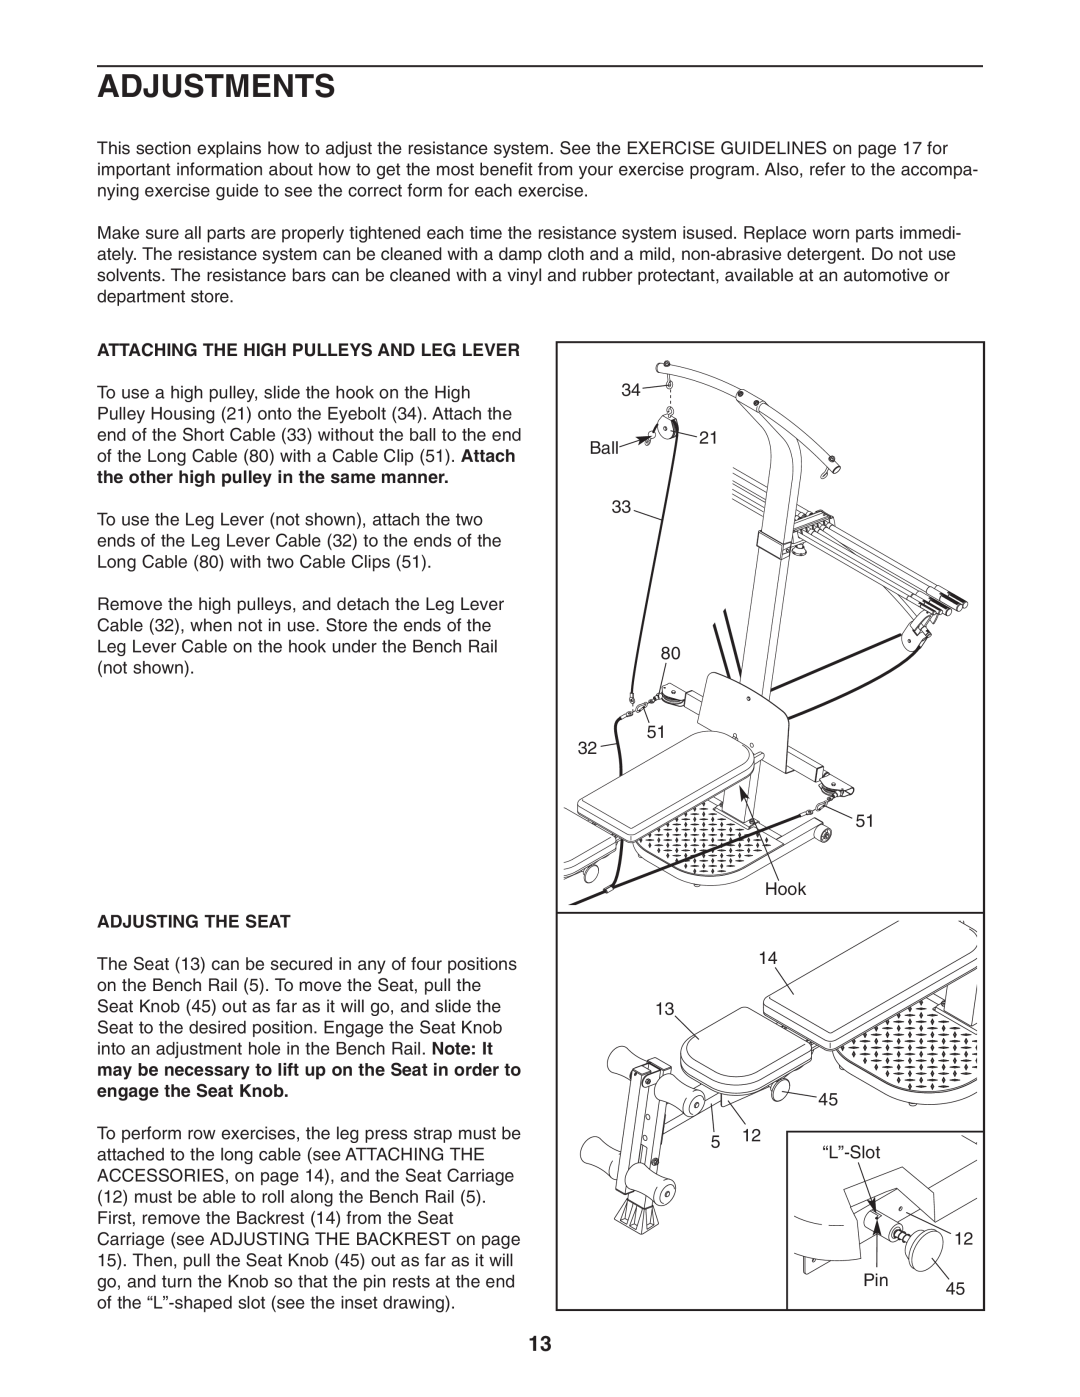 Weider WESY5983.5 user manual Adjustments, Attaching The High Pulleys And Leg Lever, Adjusting The Seat 